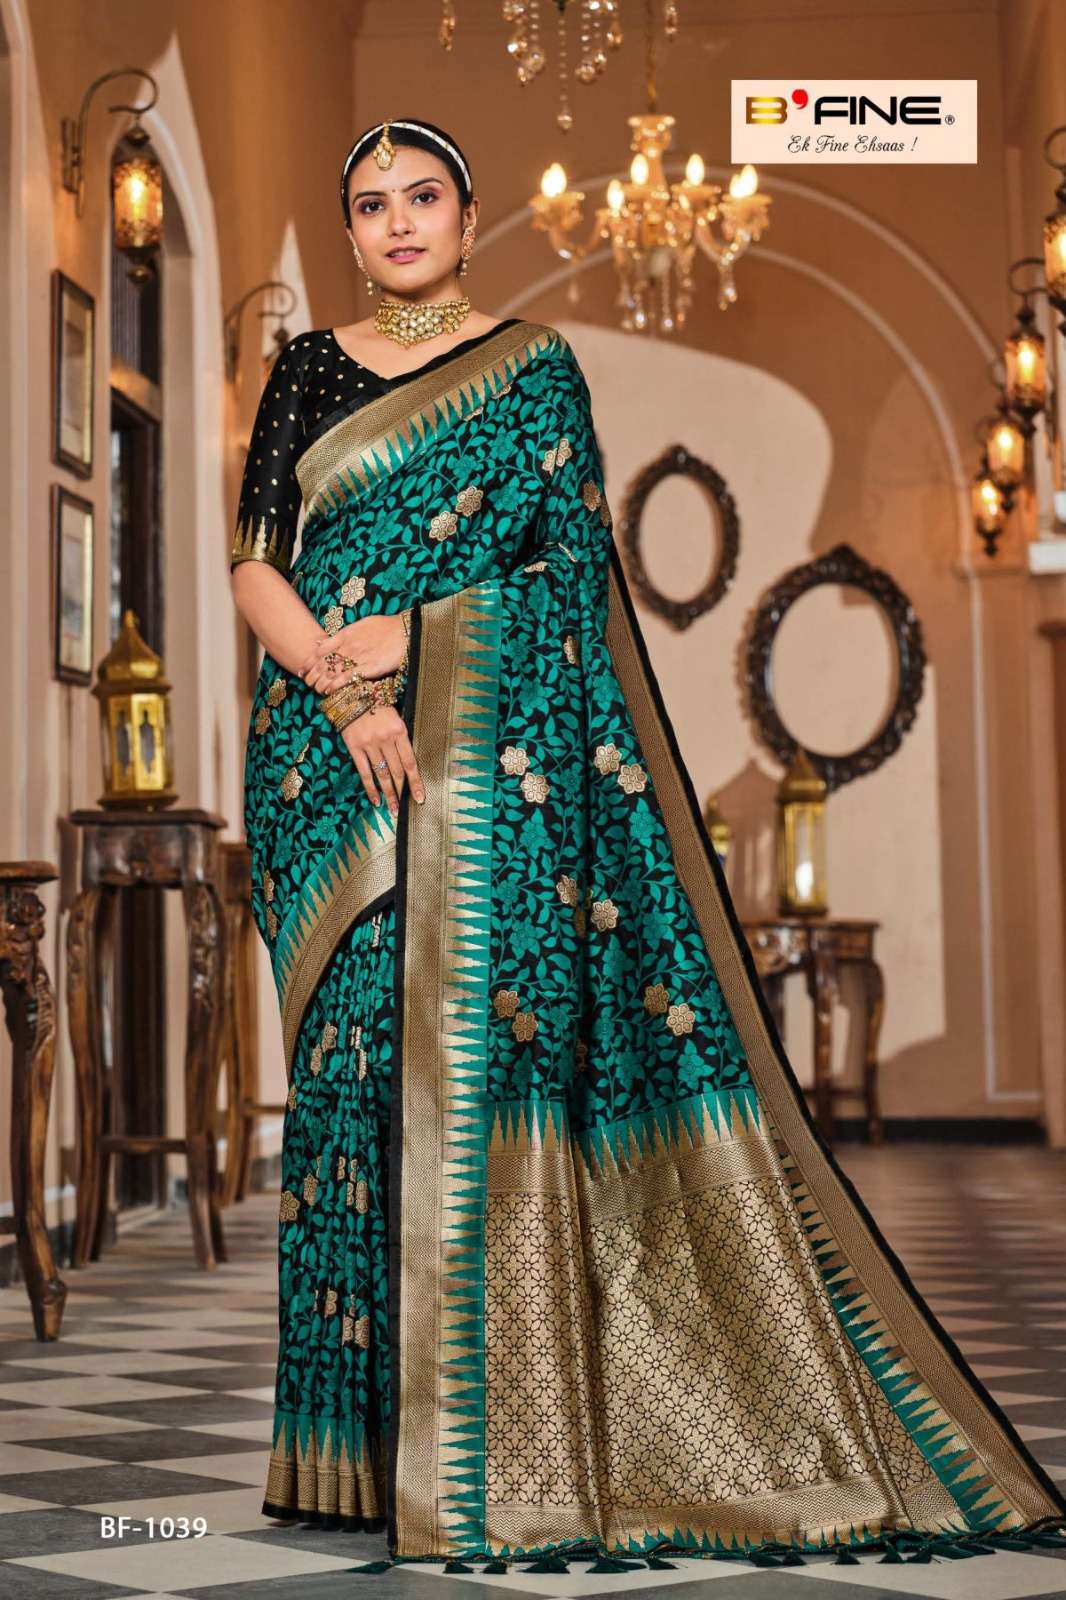 Ujwala By Bfine 1034 To 1039 Series Indian Traditional Wear Collection Beautiful Stylish Fancy Colorful Party Wear & Occasional Wear Silk Print Sarees At Wholesale Price